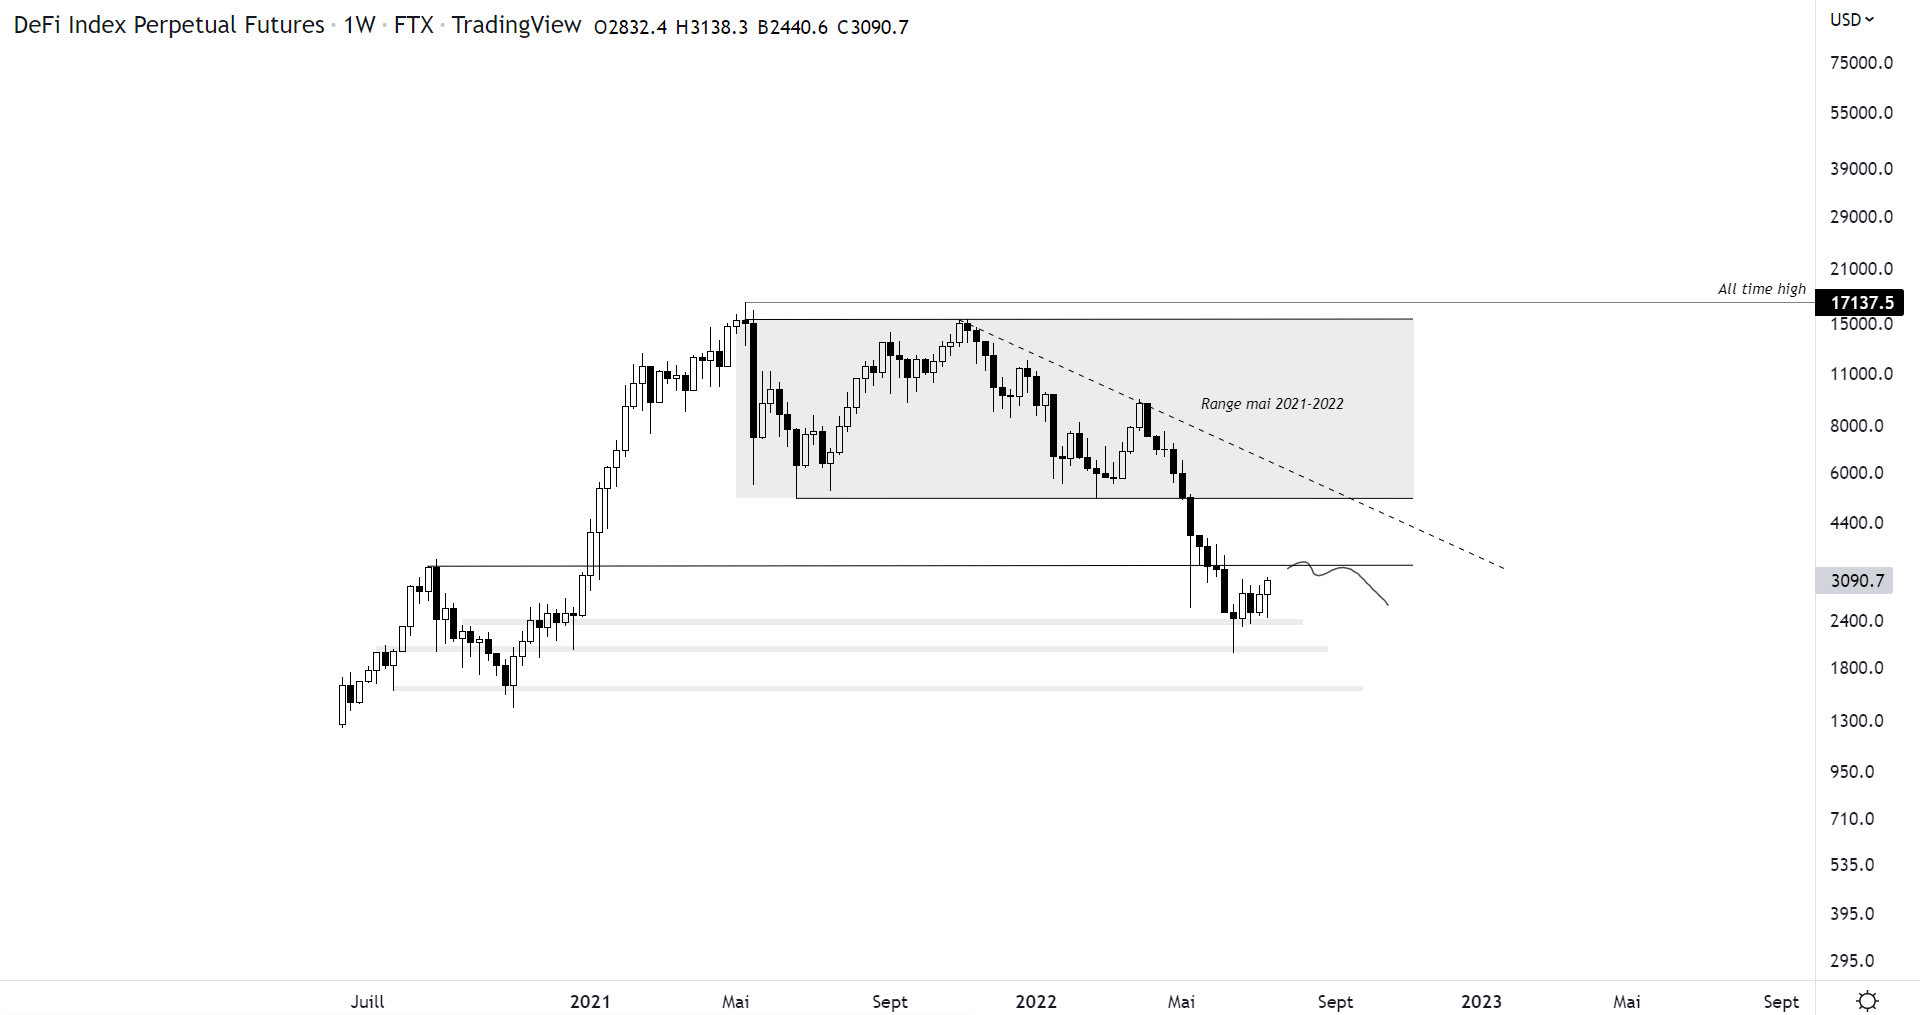 DeFi futures price against the dollar on a daily scale